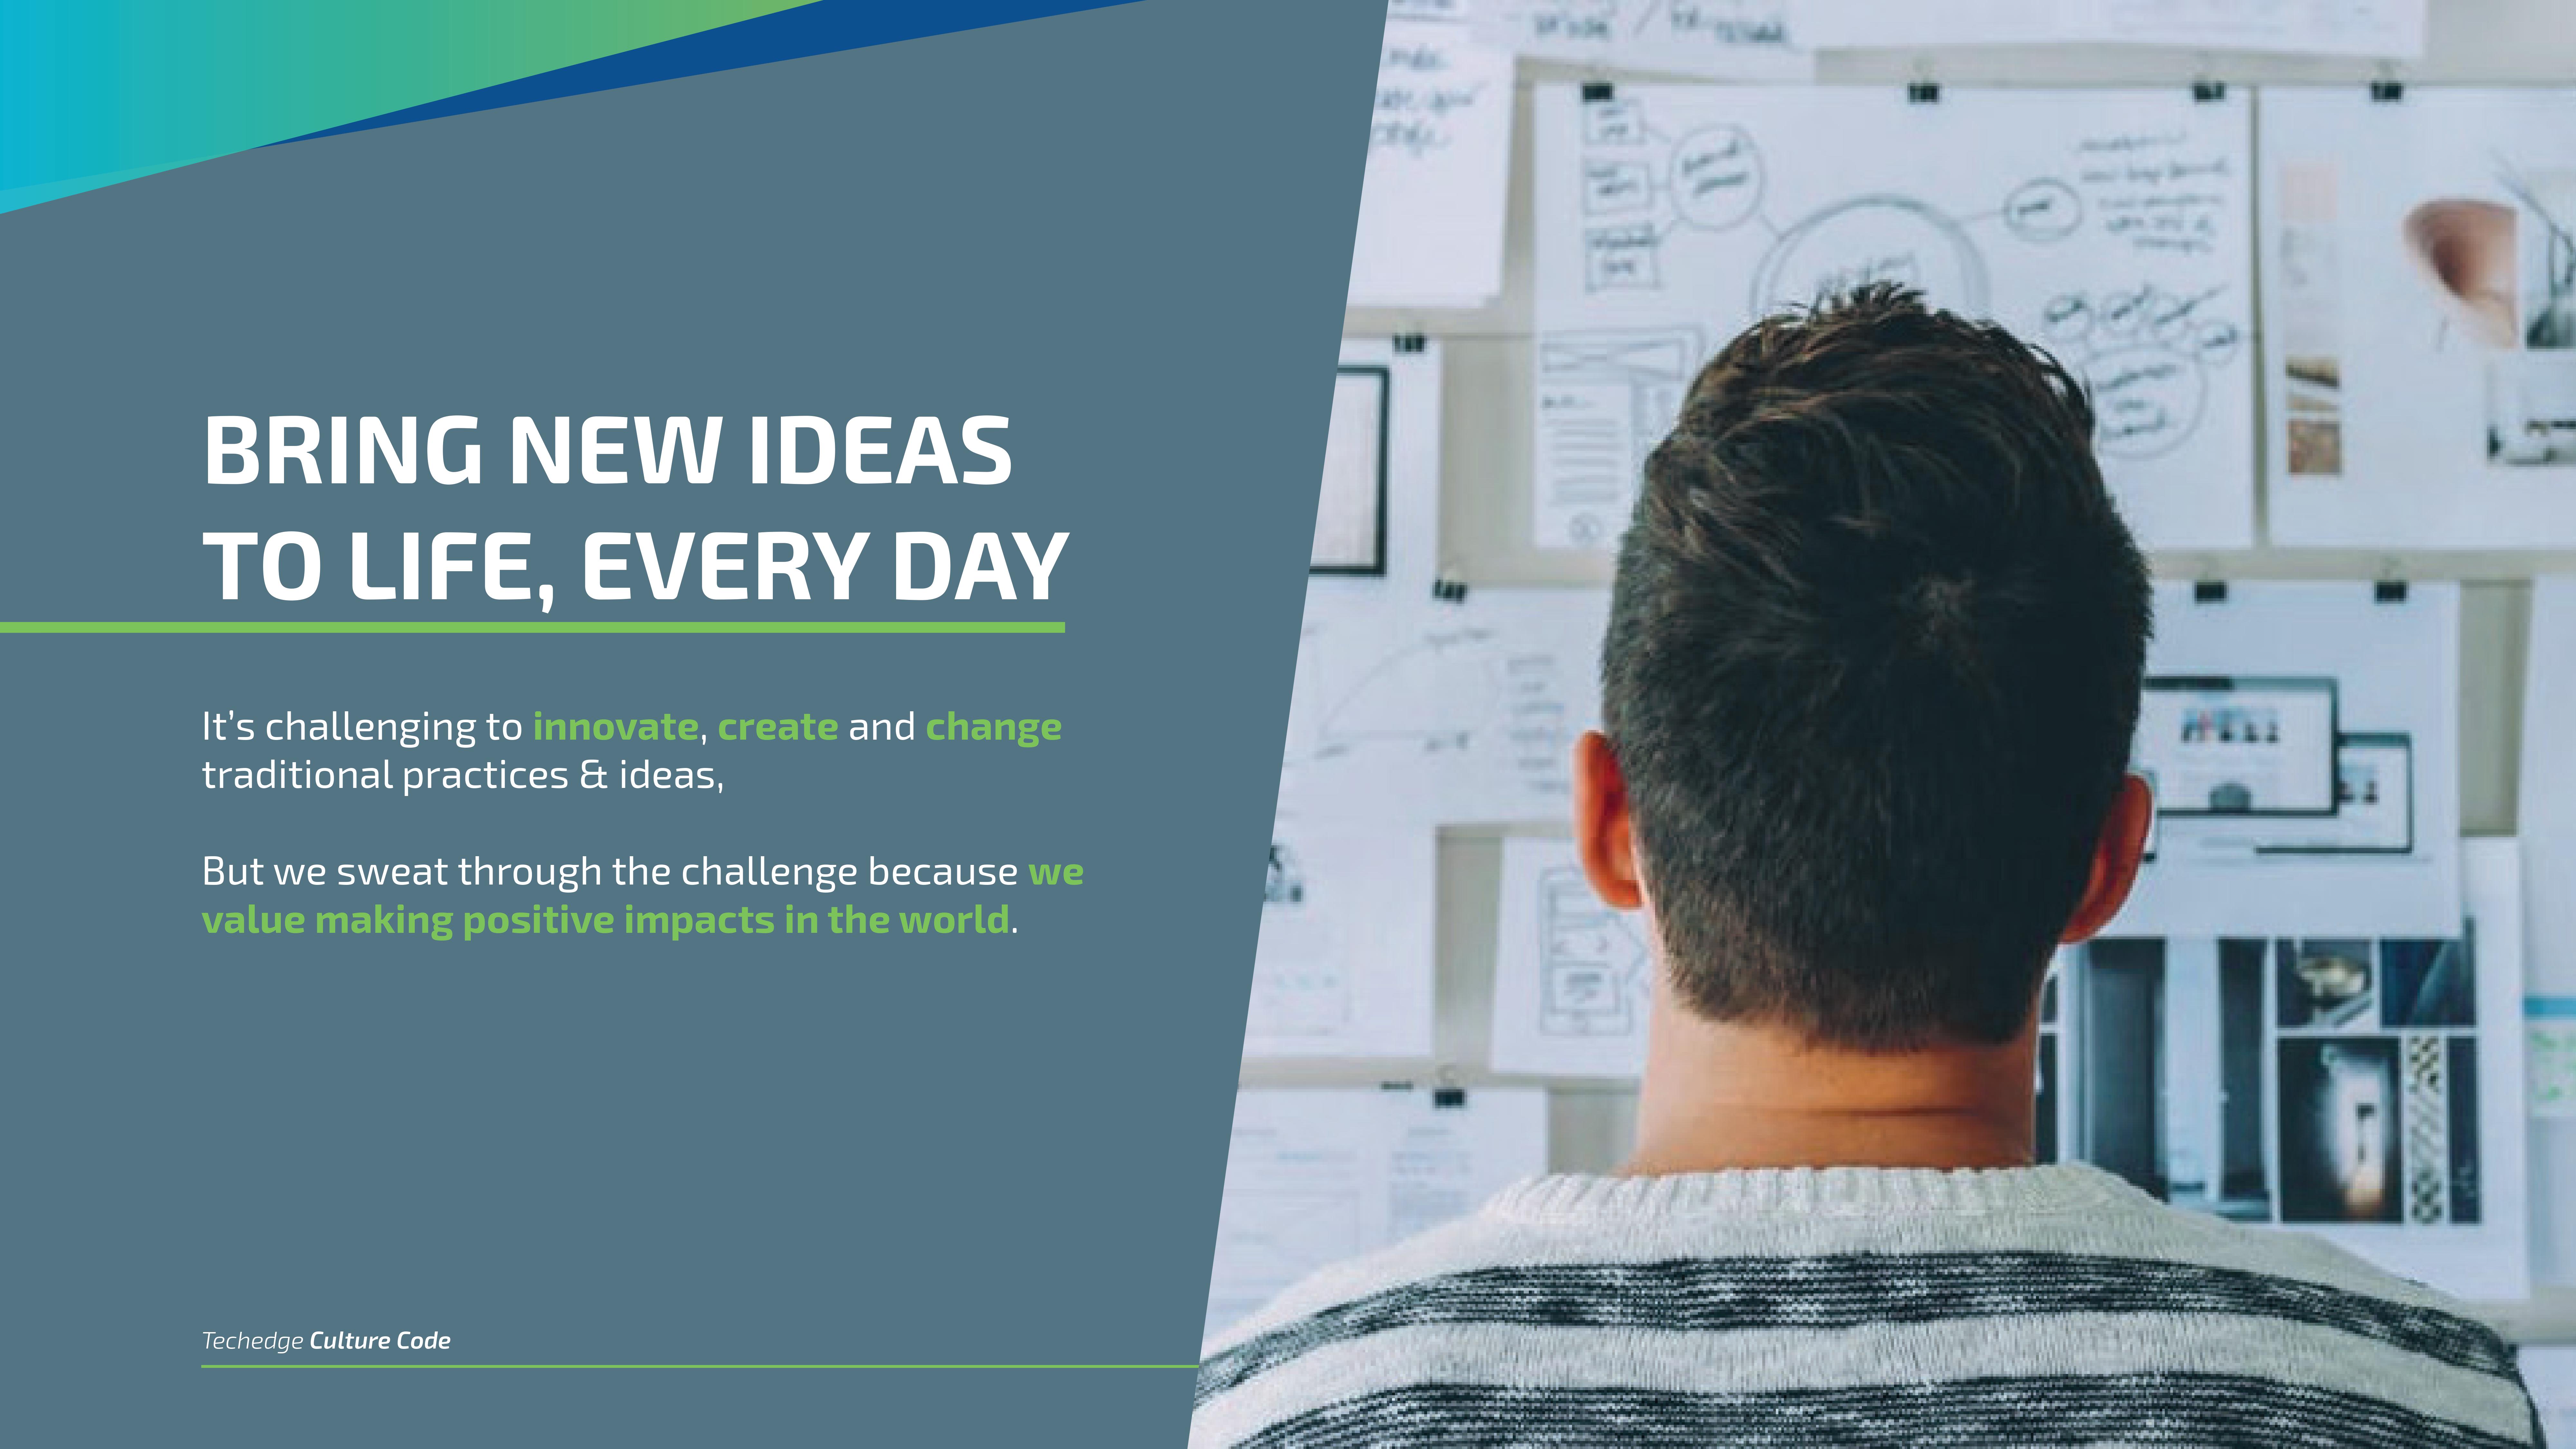 Bring new ideas to life, every day